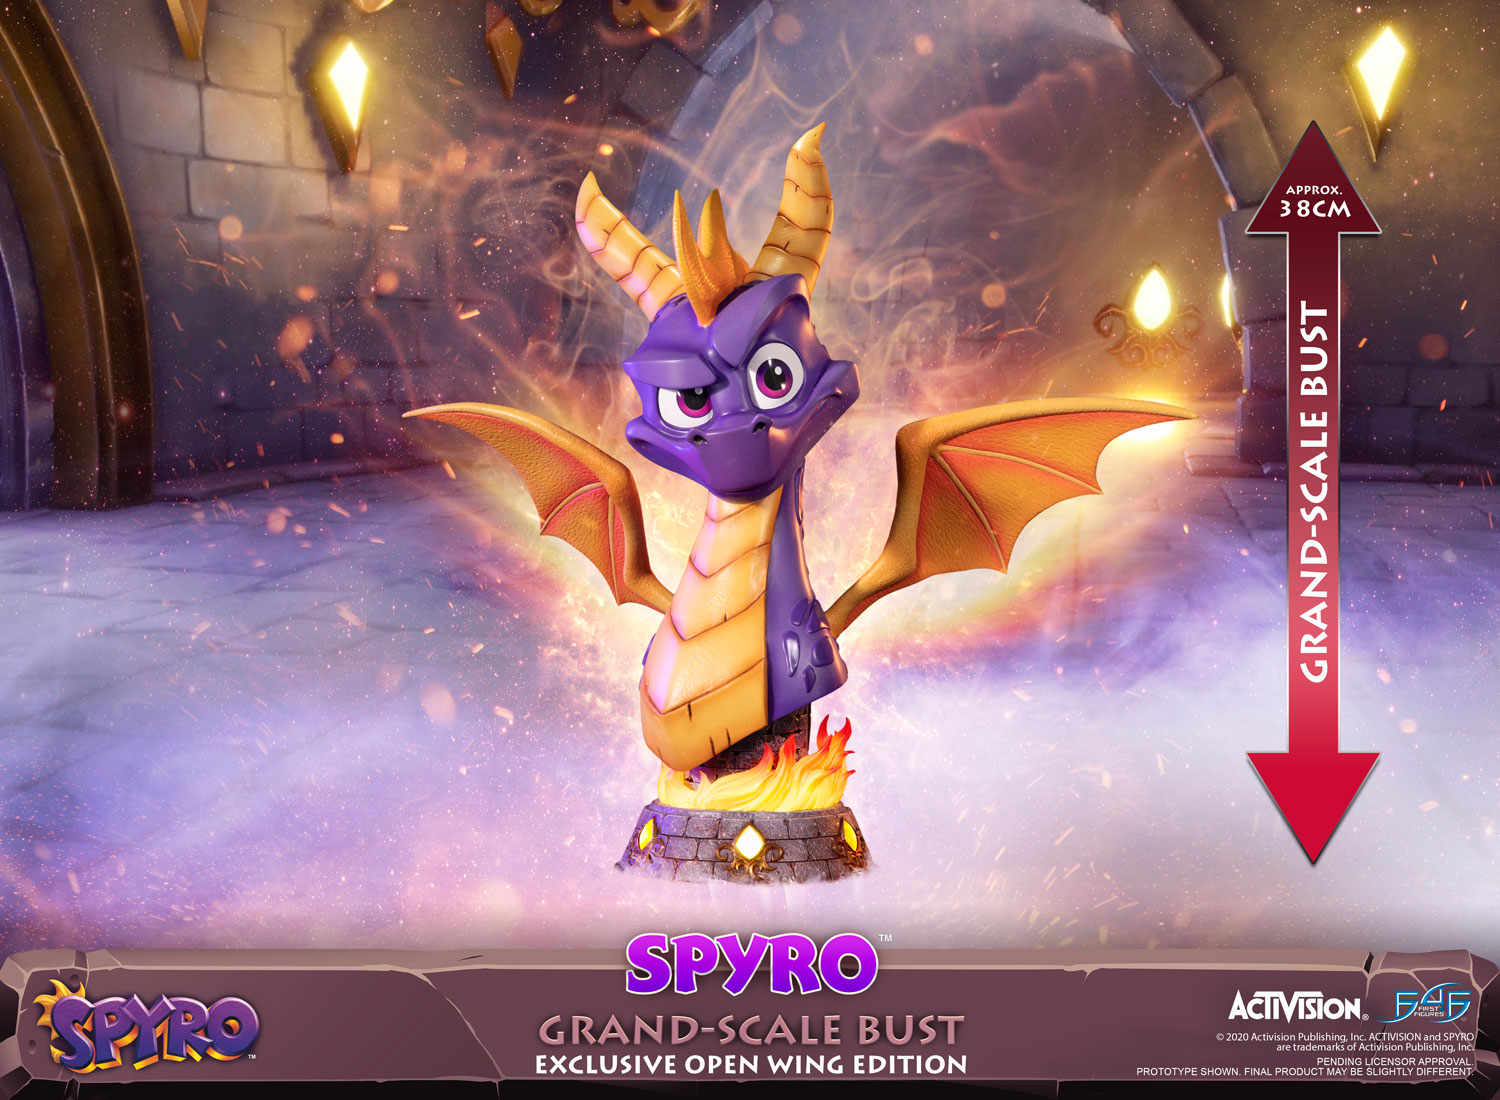 Spyro™ Grand-Scale Bust (Exclusive Open Wing Edition)